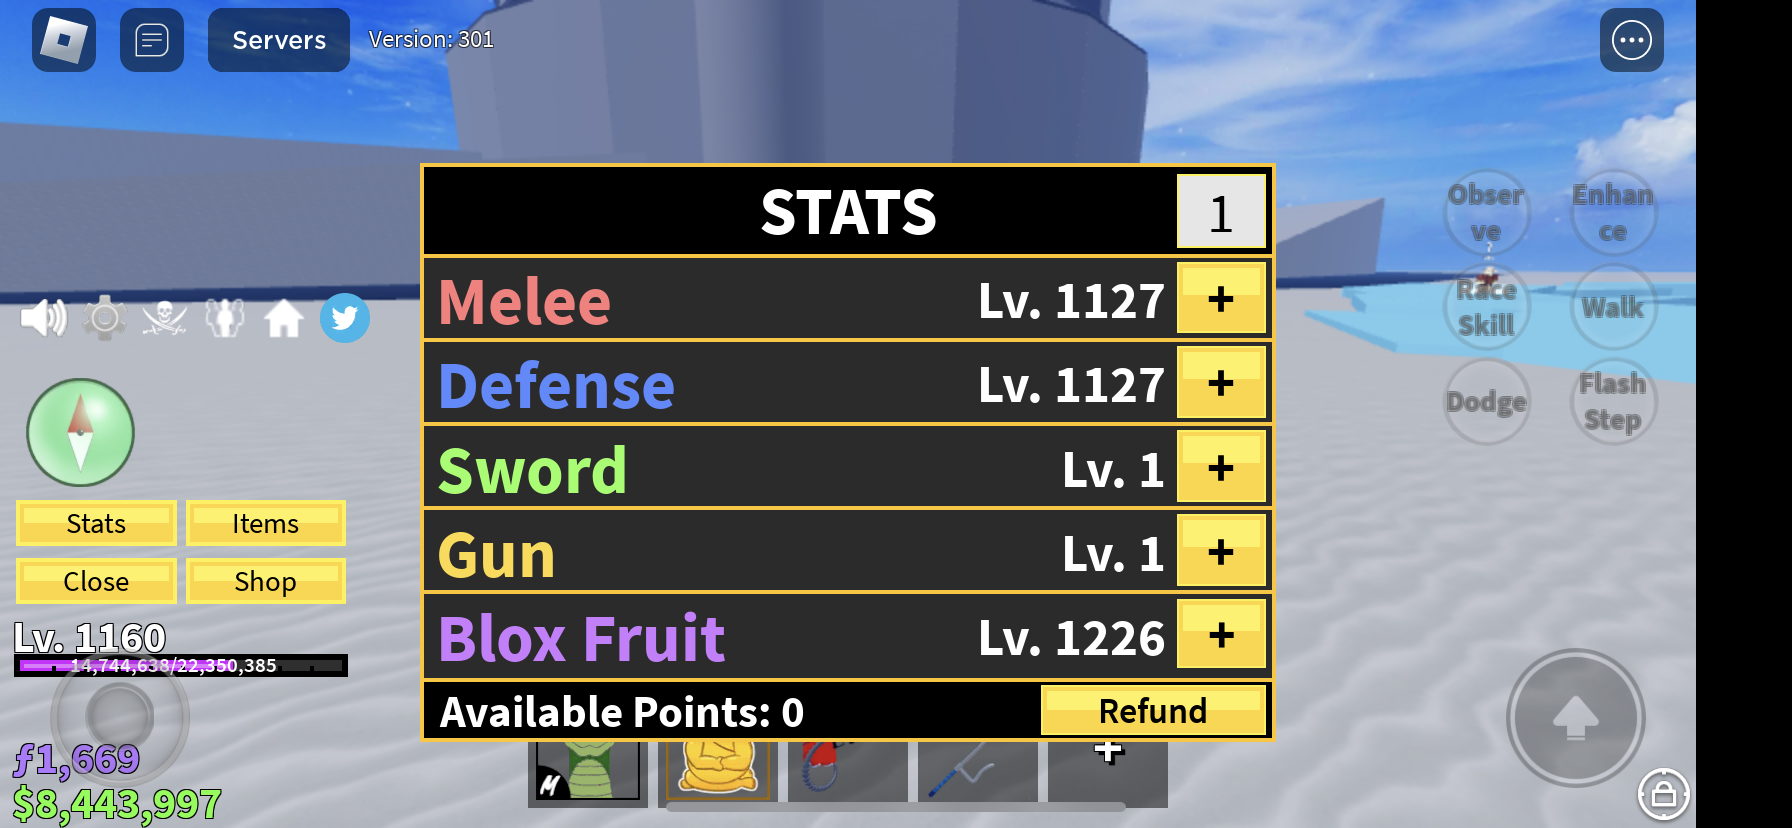 This is Literally The Best Stock i've EVER seen in Blox fruits